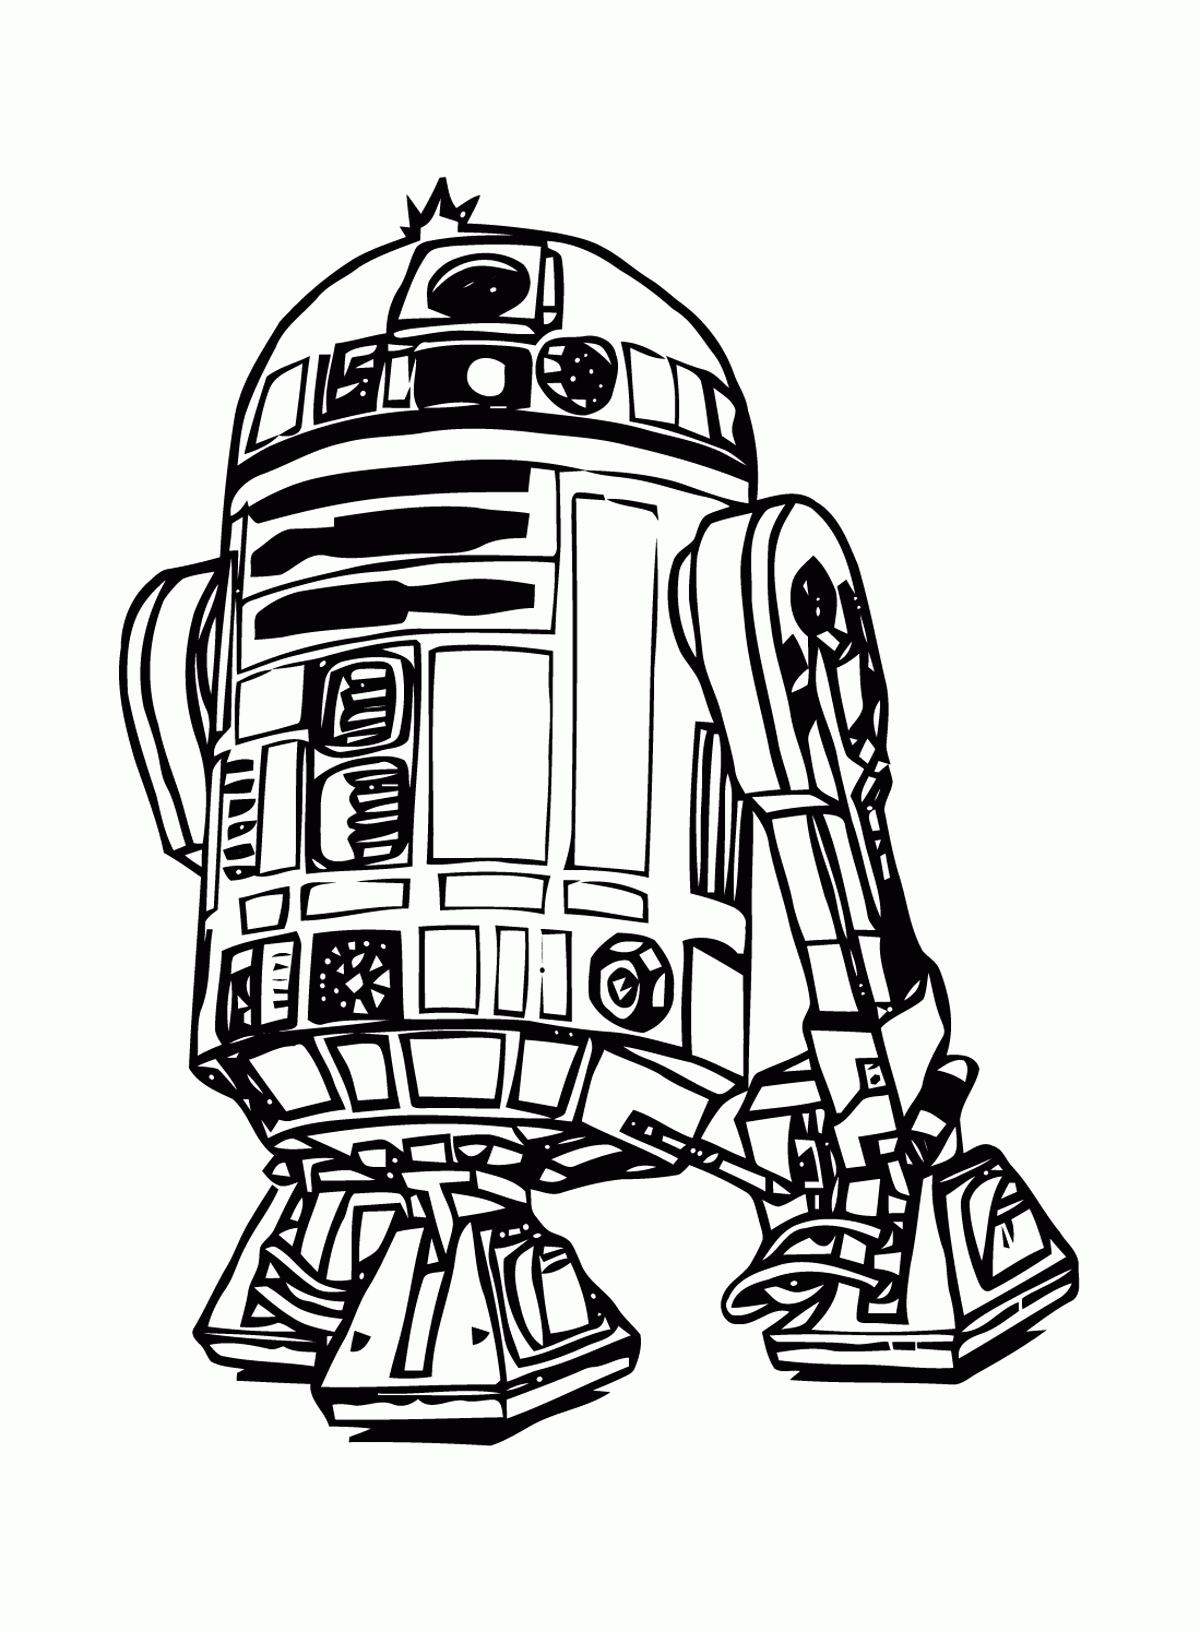 Free Star Wars Coloring Pages R2d2, Download Free Star Wars Coloring